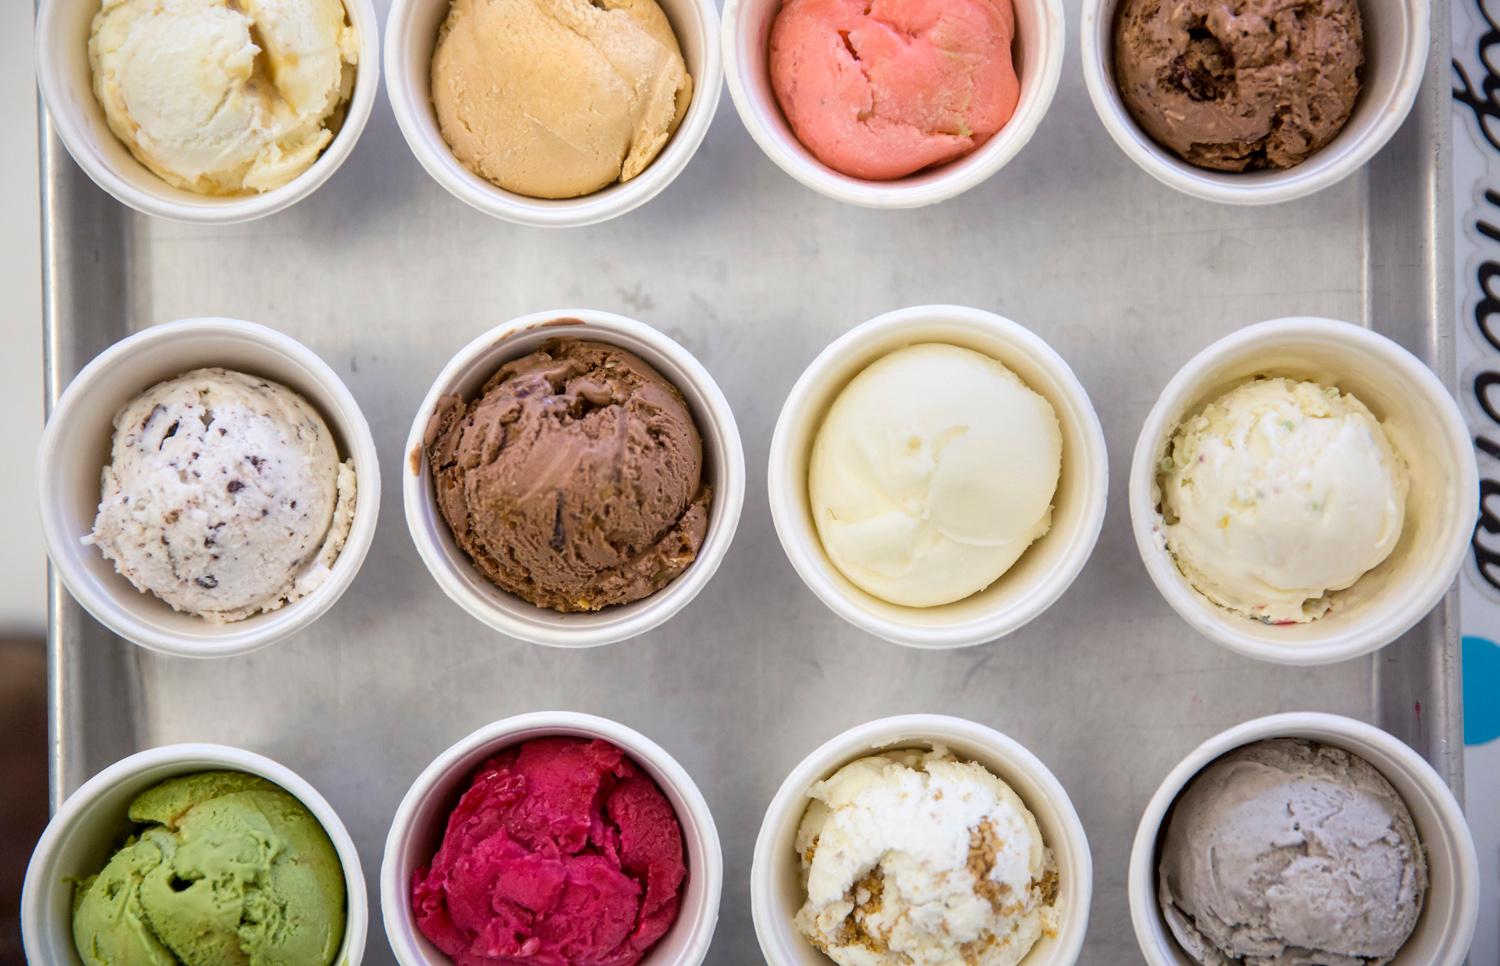 This Is Sorta Weird, But We Can Guess Your Age Based on the Things You Have in Your Fridge Ice Cream Flavors